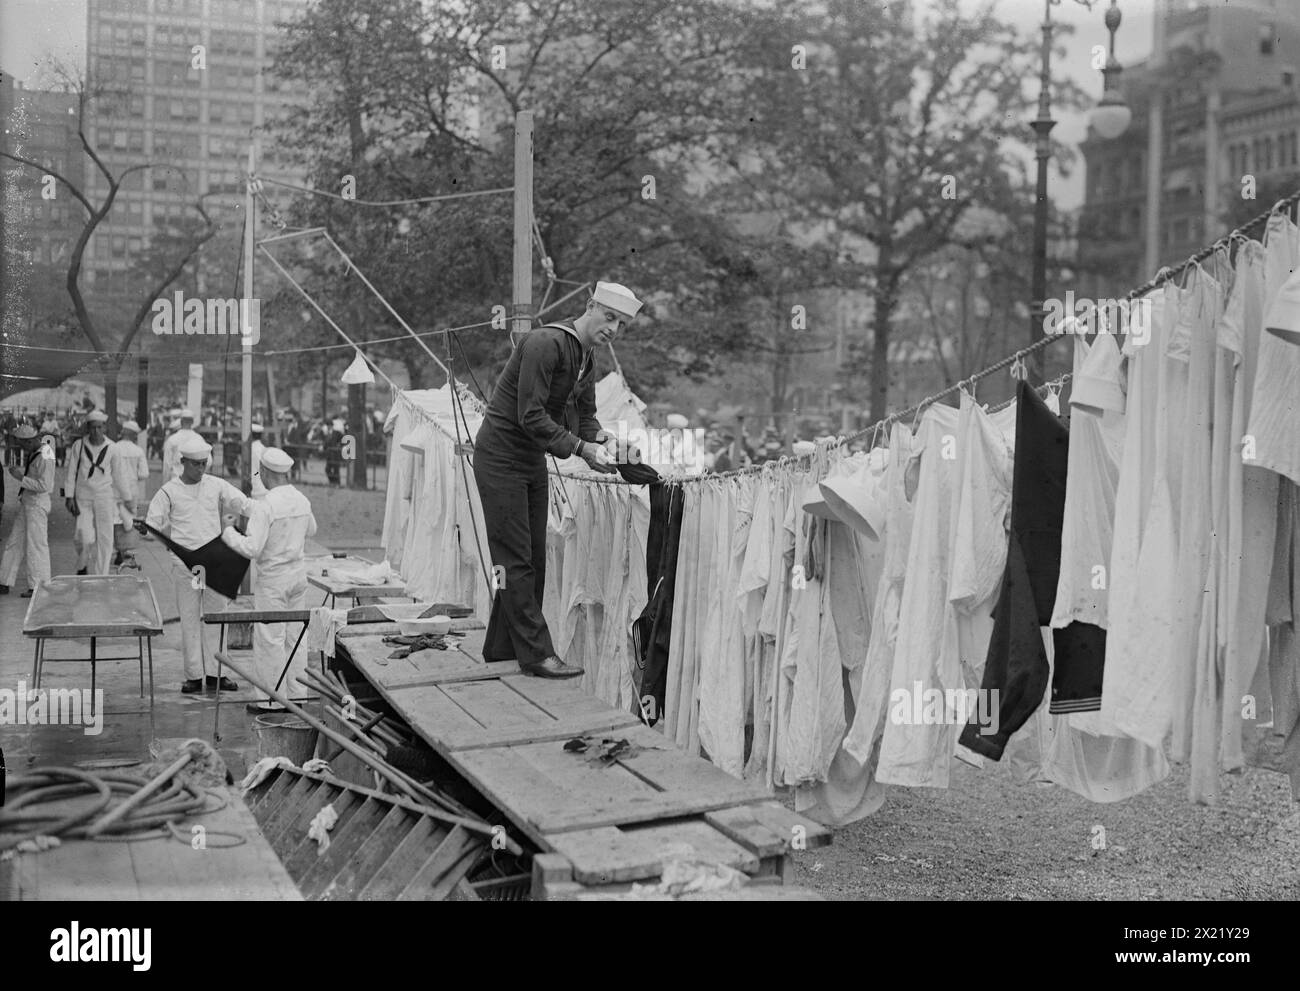 W.J. Reilly, unknown date. William J. Reilly, sergeant in the Navy and vaudeville performer, who recorded patriotic songs as &quot;Sailor Reilly&quot;. He is hanging laundry on the grounds of the USS Recruit, a wooden mockup of a battleship built in Union Square, New York City by the Navy to recruit seamen and sell Liberty Bonds during World War I. Stock Photo